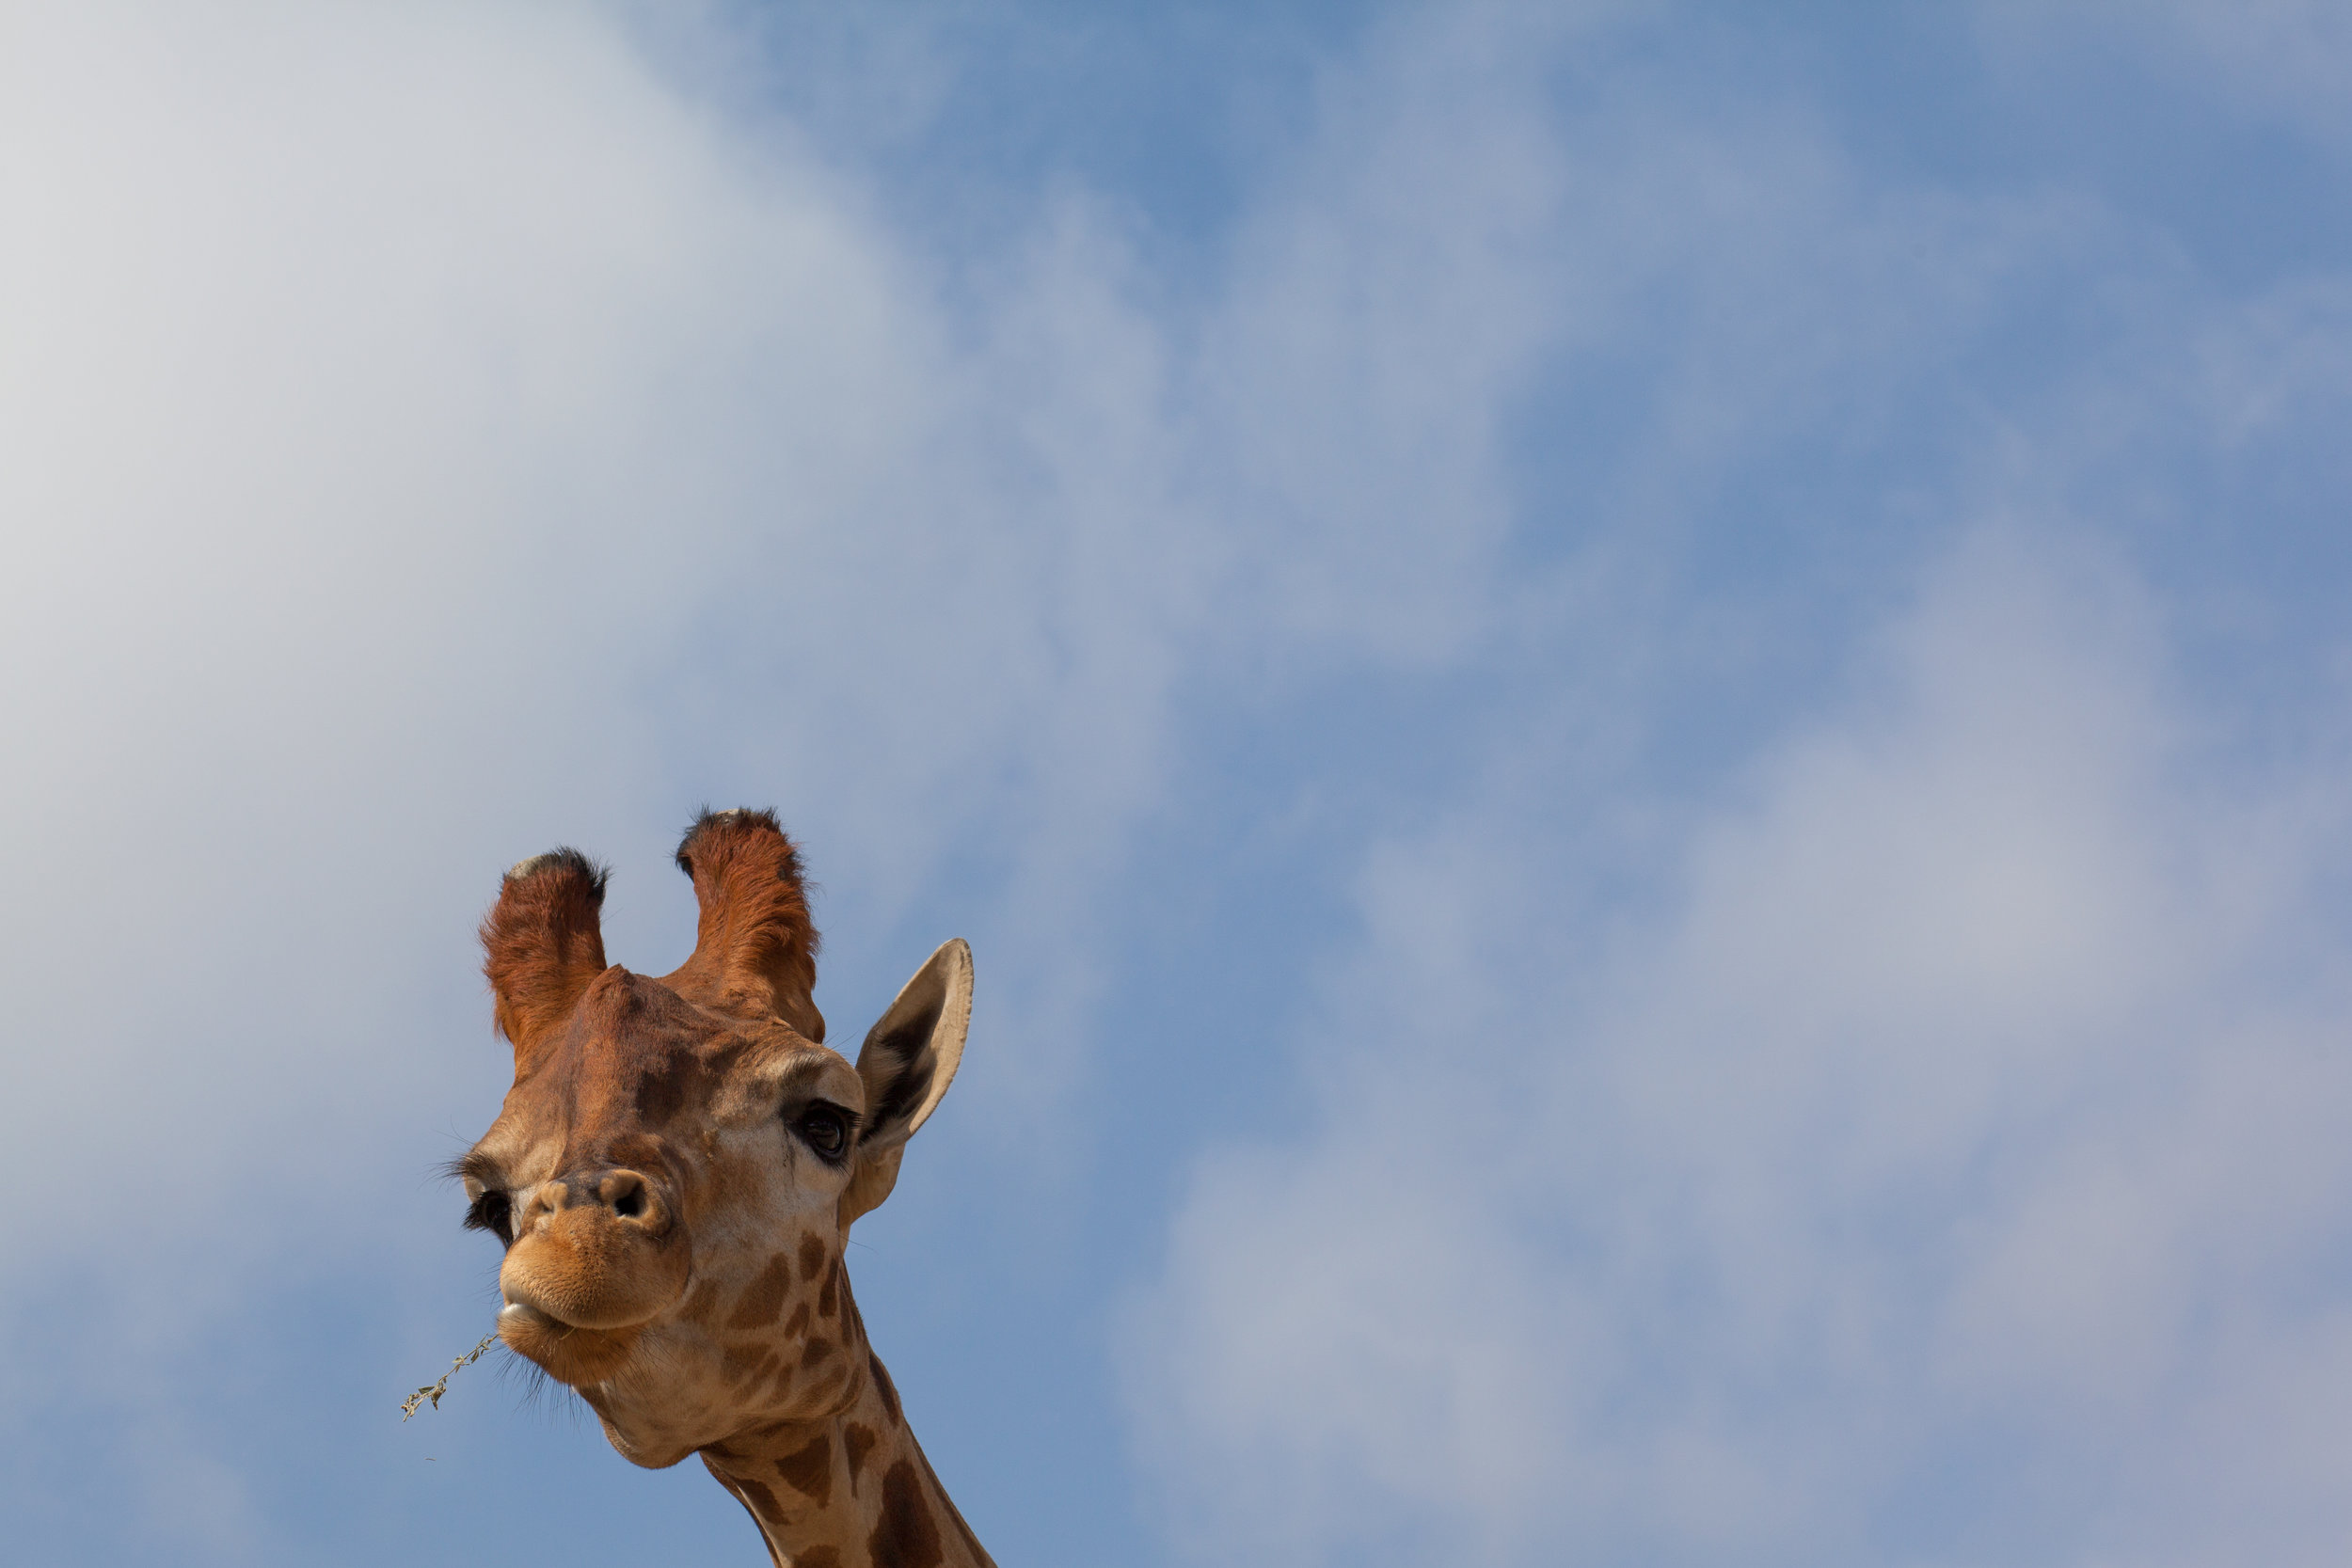 Negative space adds an element of humour to this photo of a giraffe.